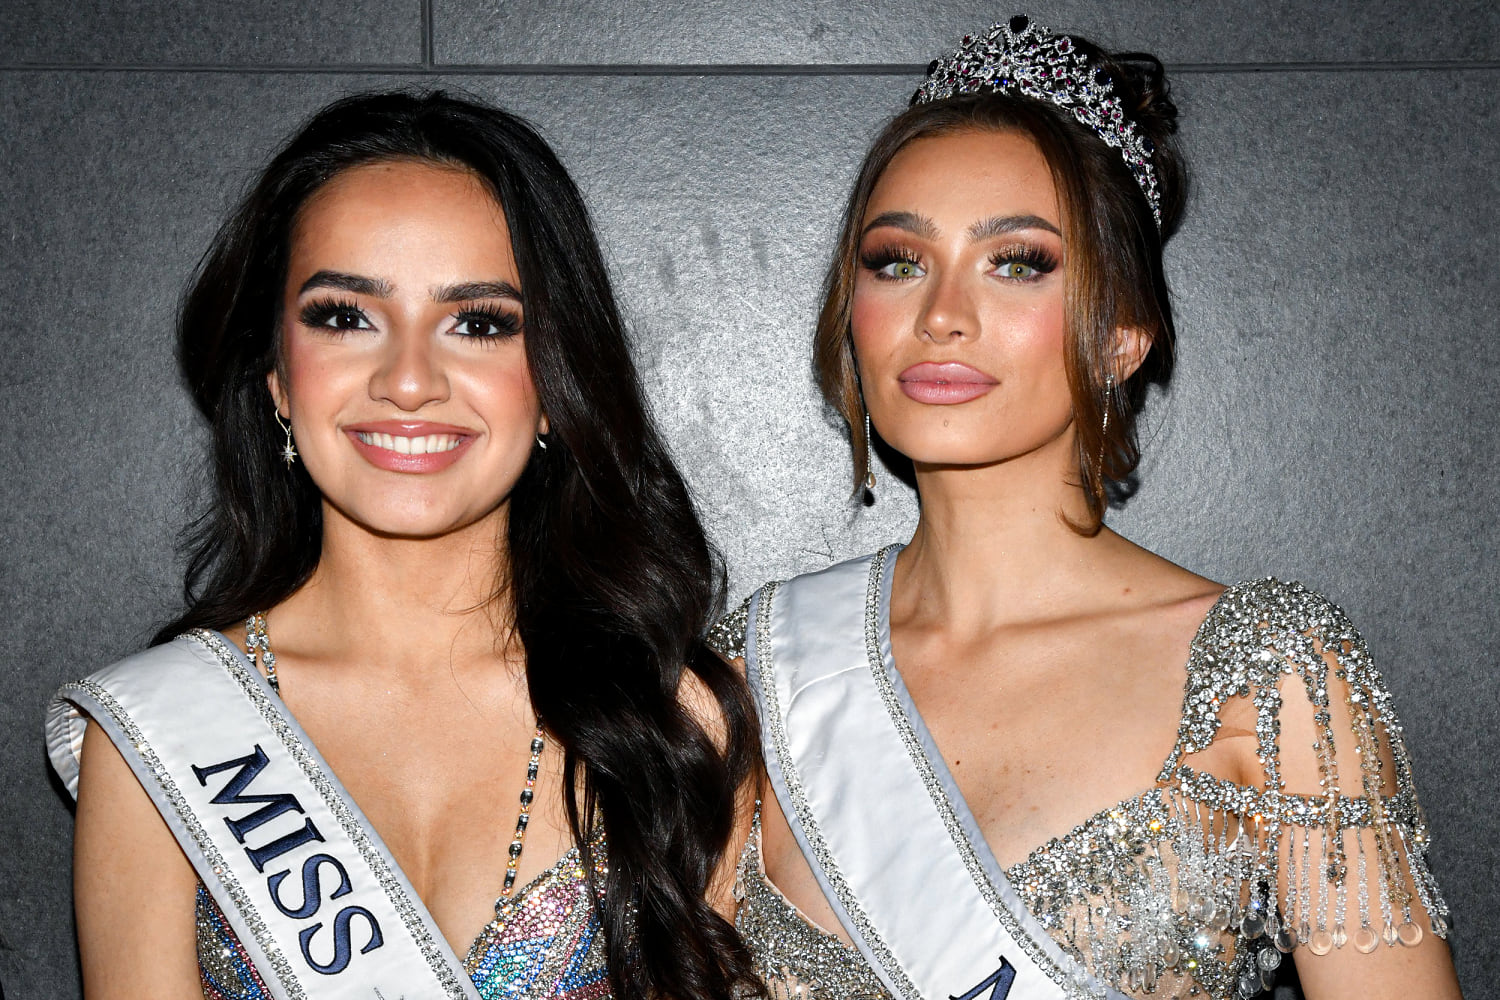 Internet sleuths say Noelia Voigt left hidden message in Miss USA resignation: 'I am silenced'